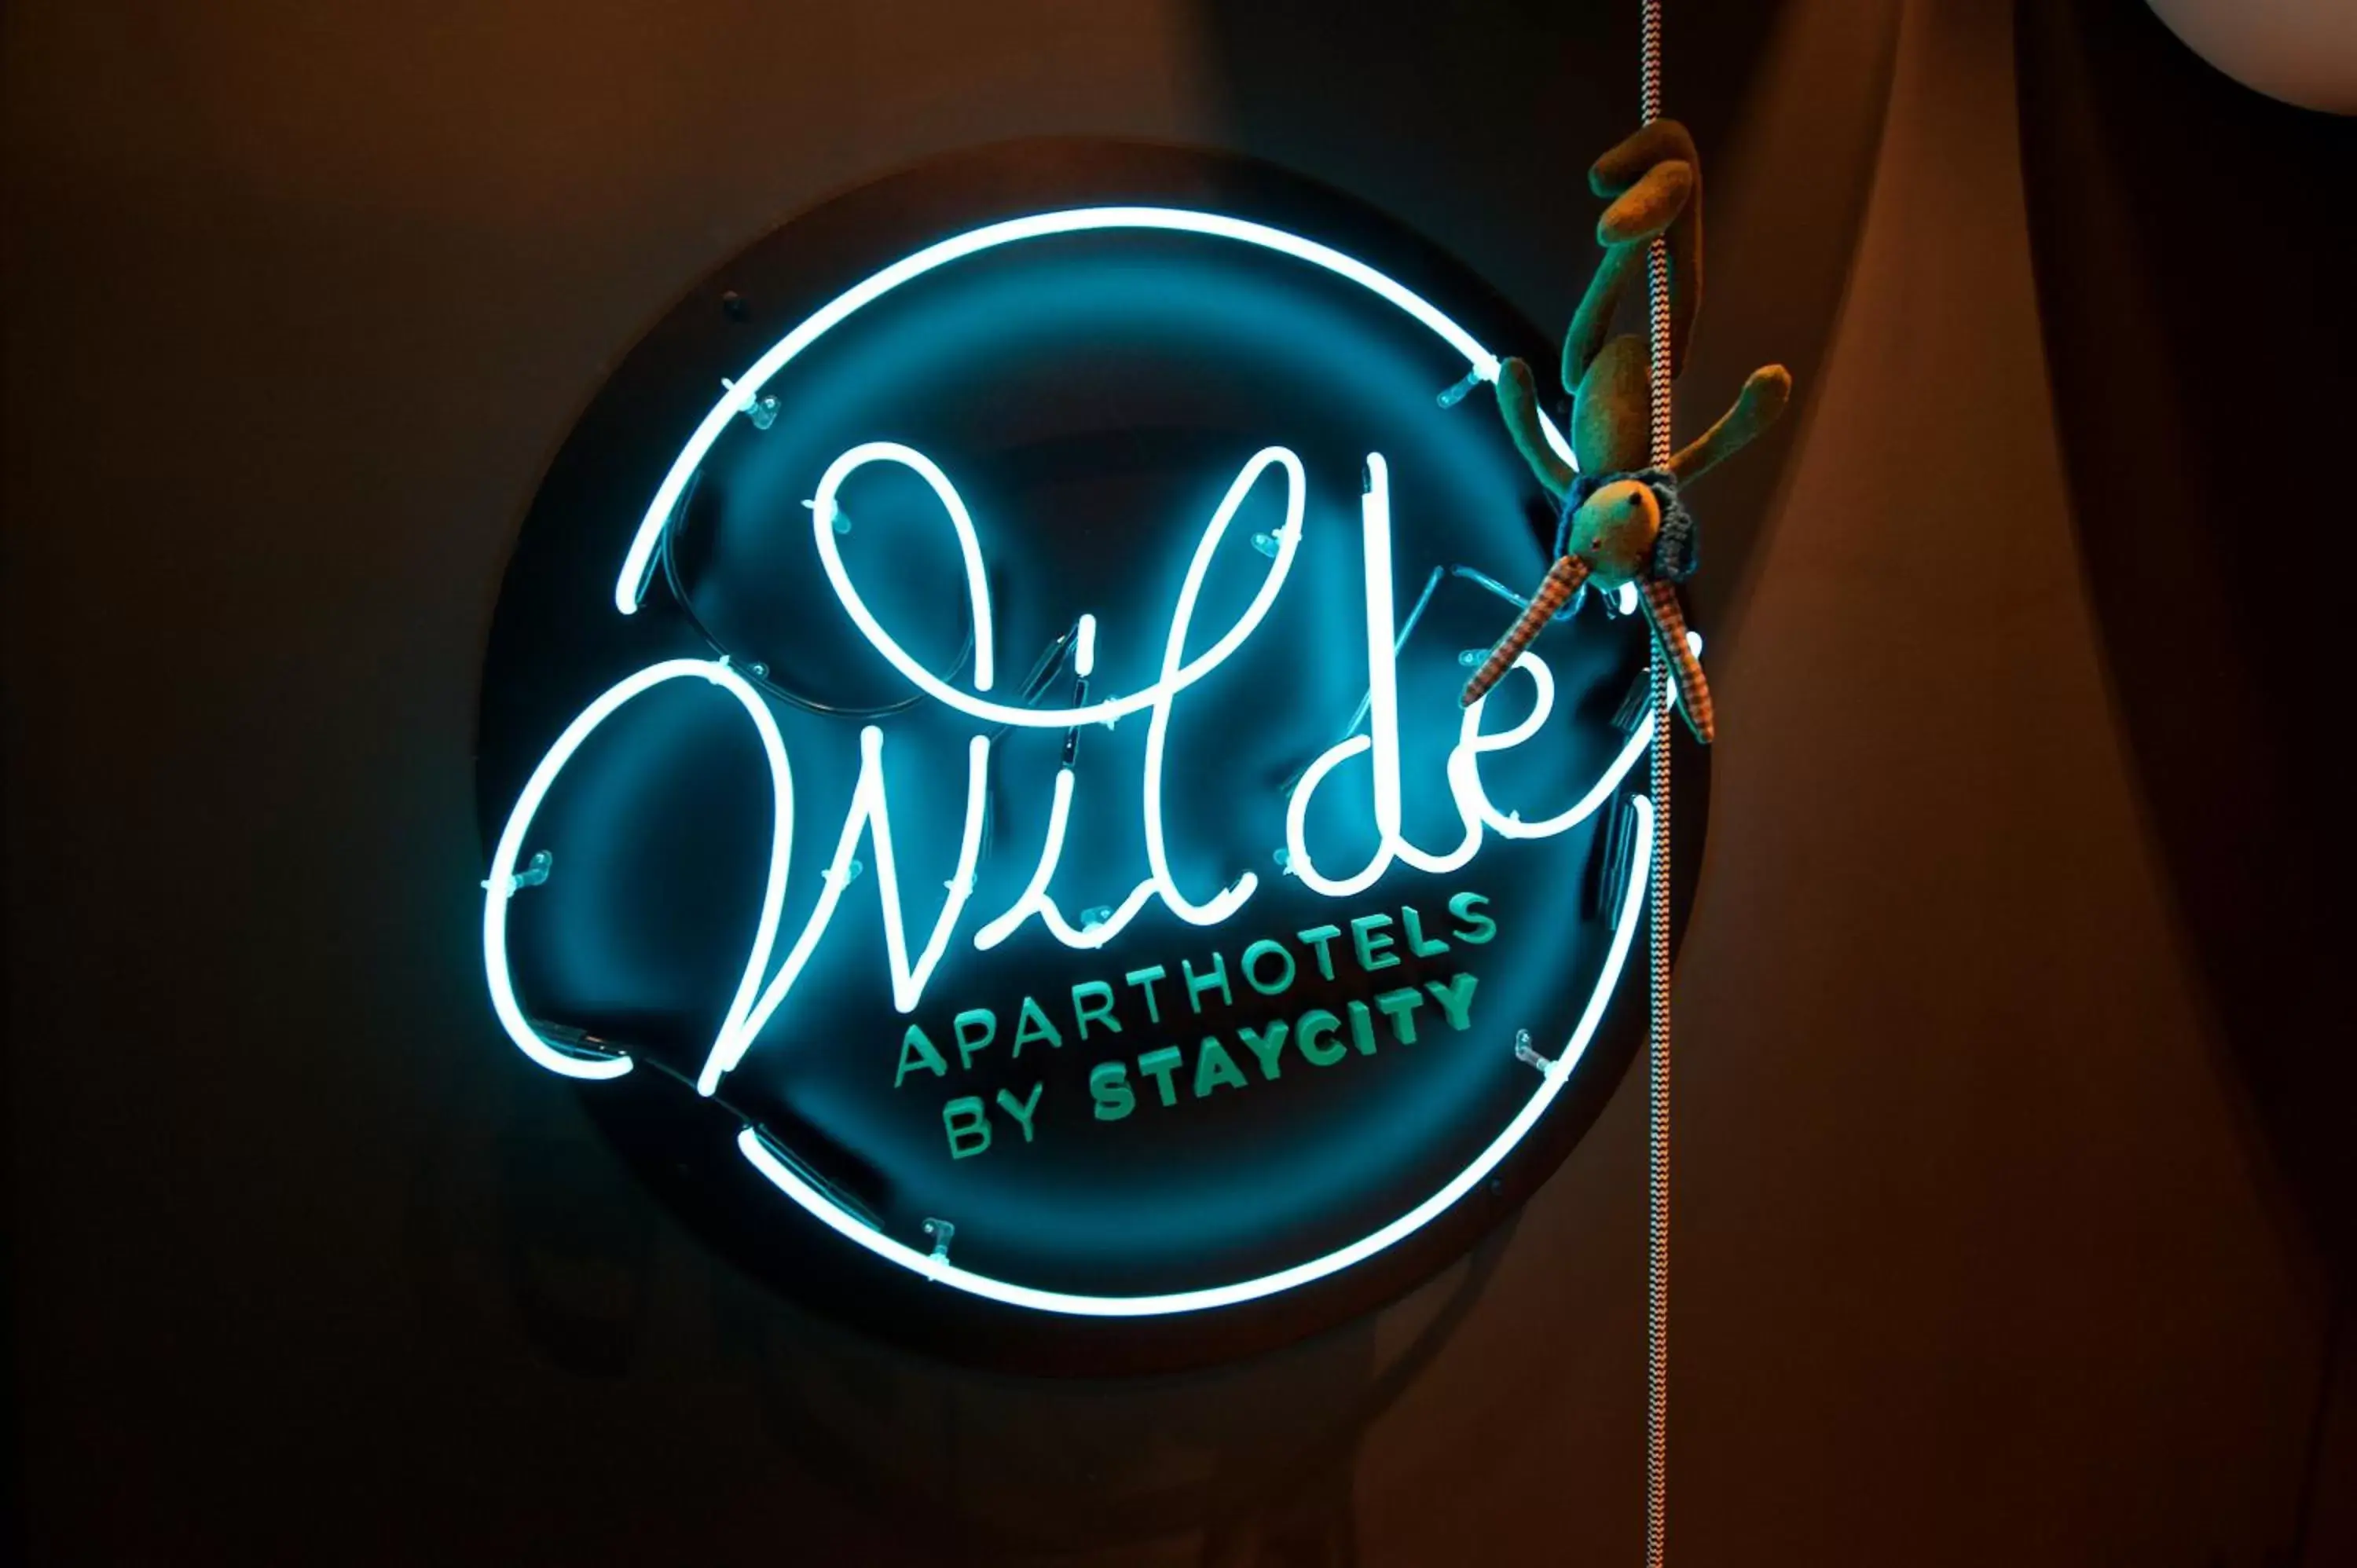 Property Logo/Sign in Wilde Aparthotels by Staycity Covent Garden